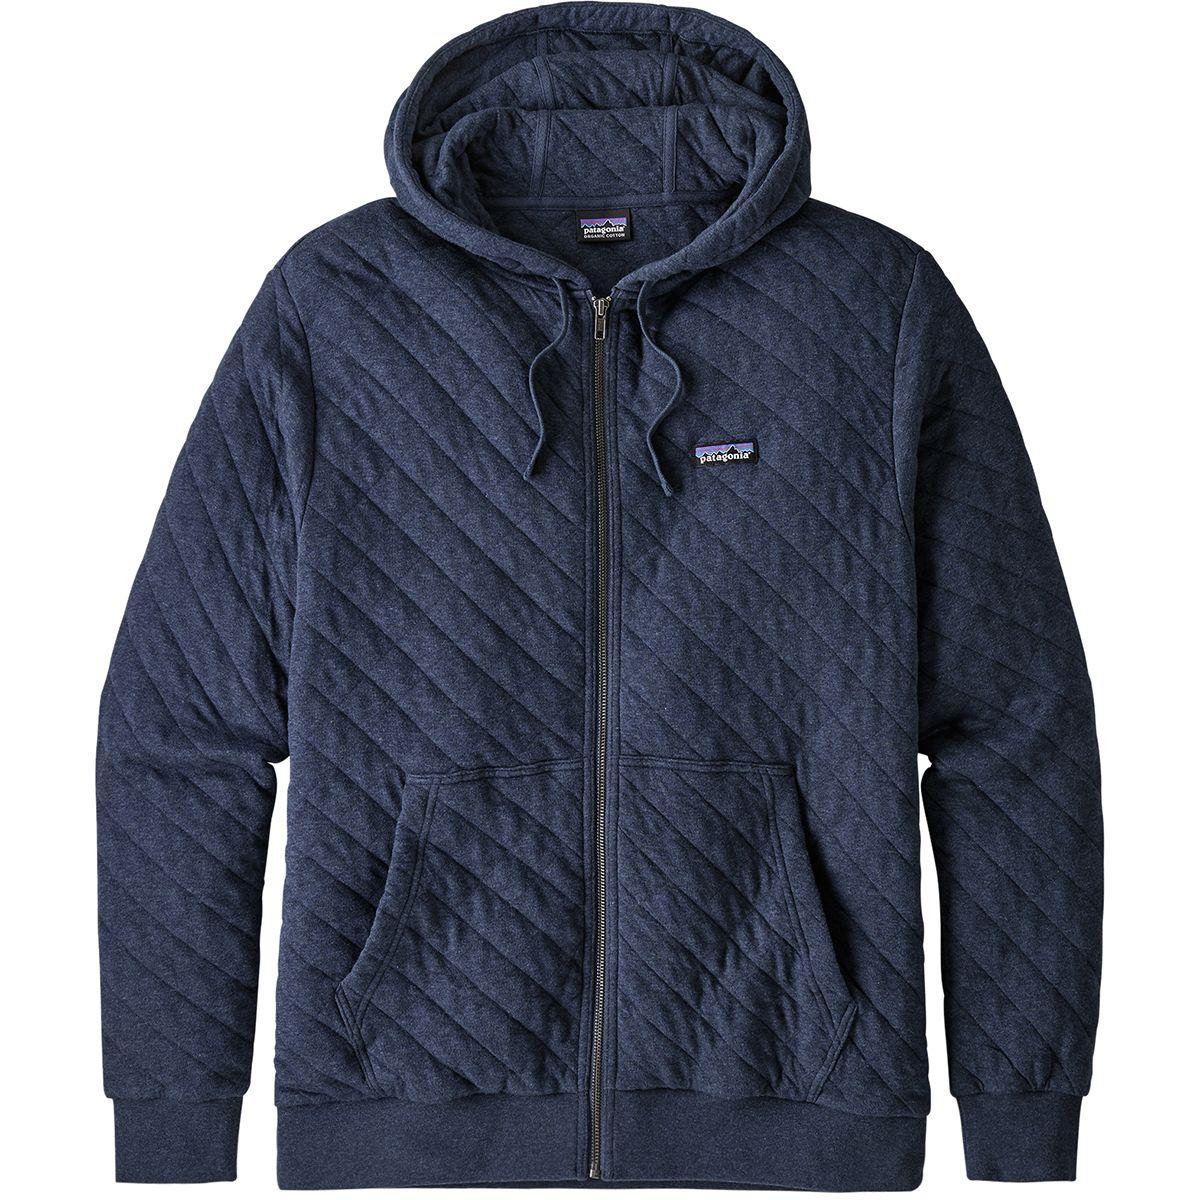 Patagonia Organic Cotton Quilt Full-zip Hoodie in Blue for Men - Lyst